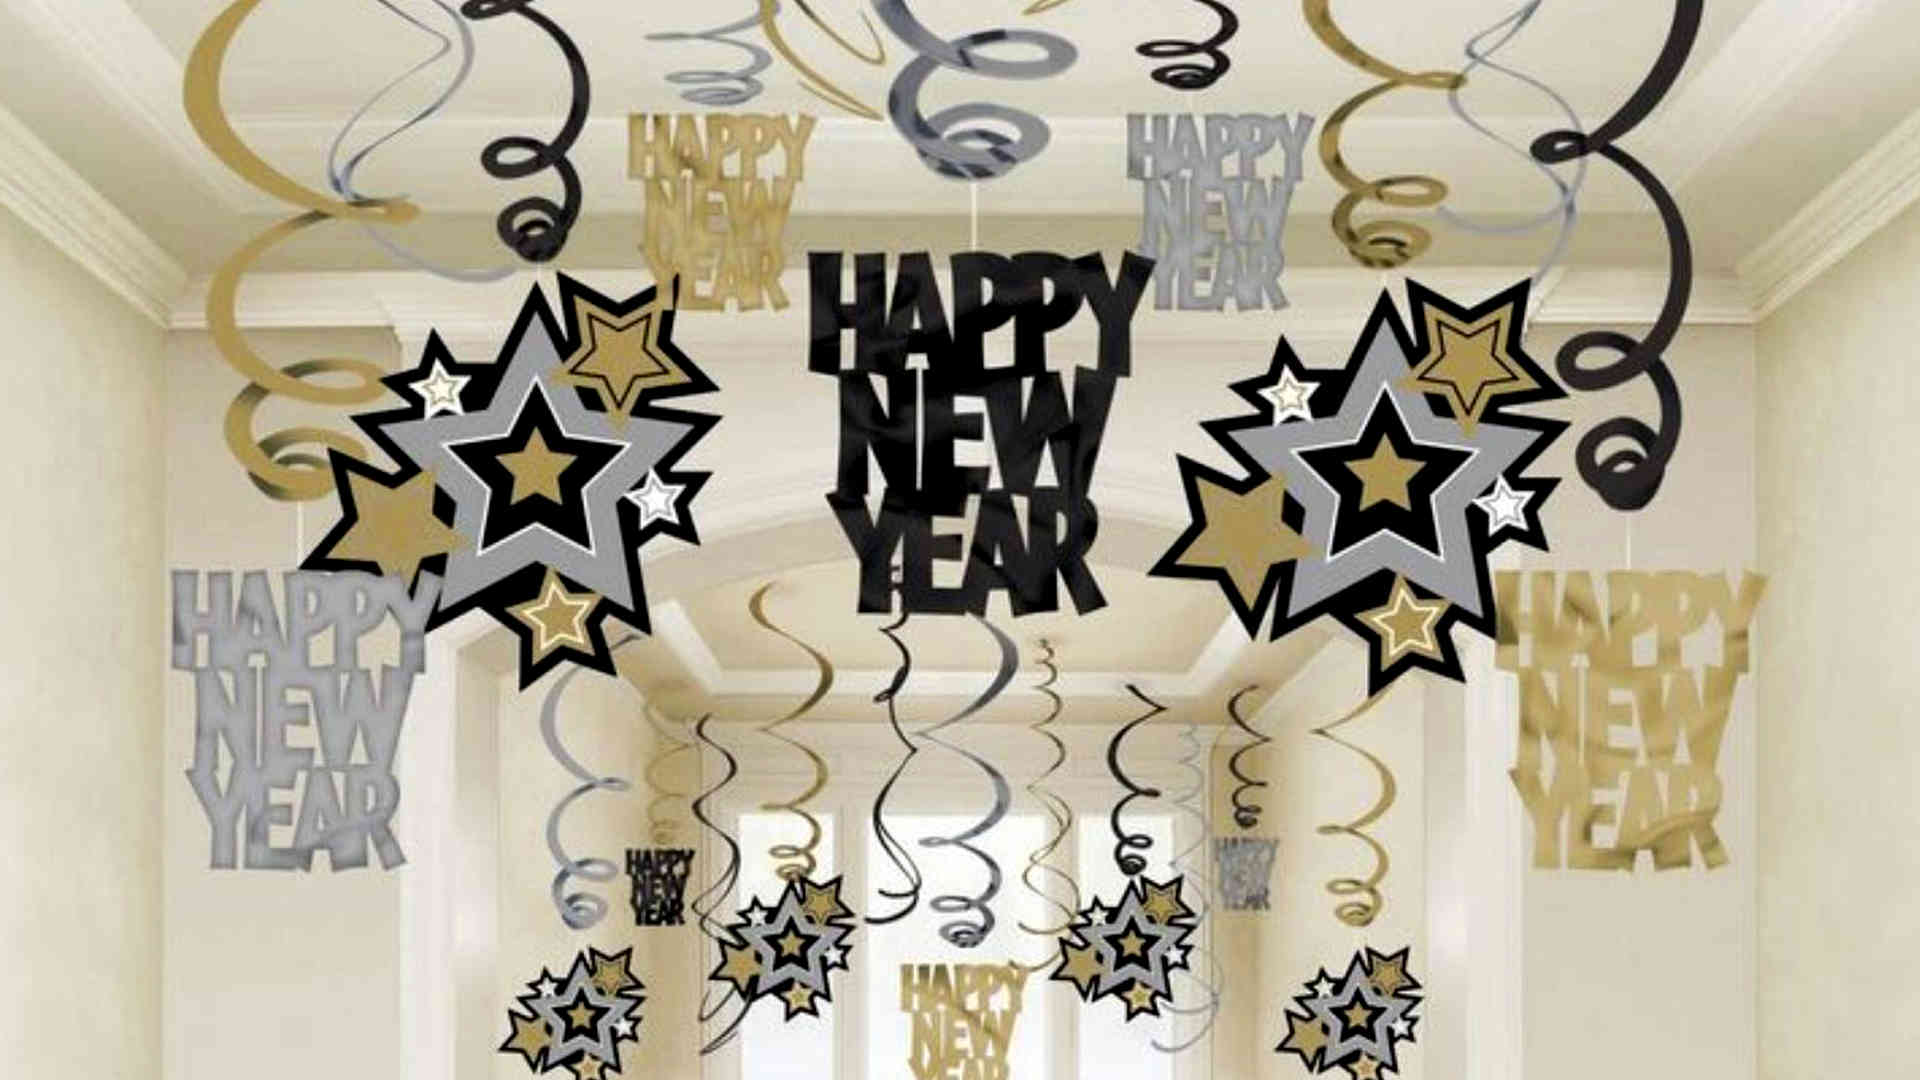 Happy New Year 2018 Decorations Ideas Image & New Years Eve